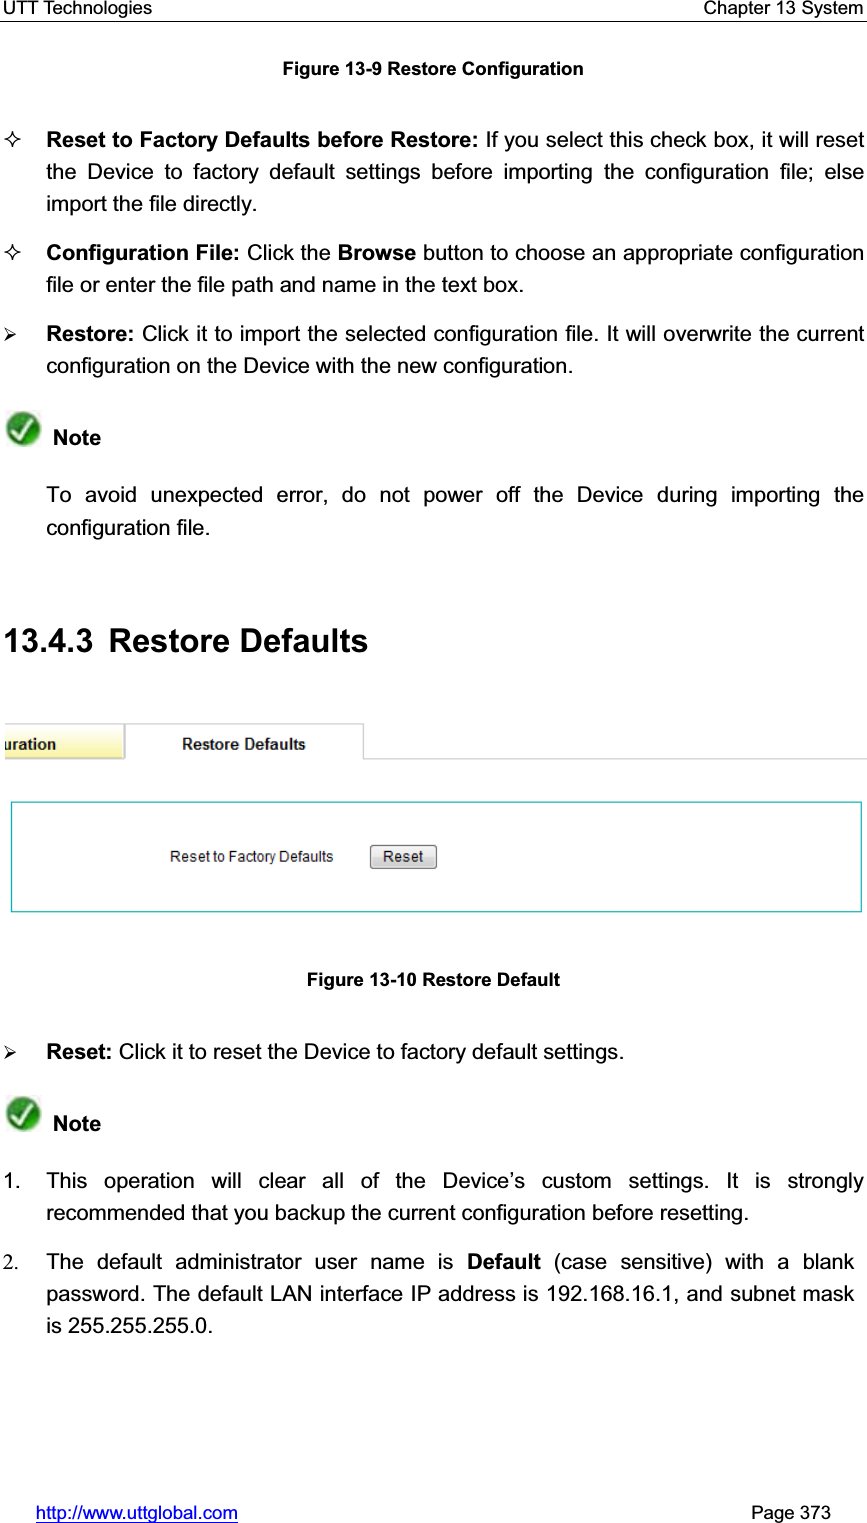 UTT Technologies    Chapter 13 System   http://www.uttglobal.com                                                       Page 373 Figure 13-9 Restore Configuration Reset to Factory Defaults before Restore: If you select this check box, it will reset the Device to factory default settings before importing the configuration file; else import the file directly. Configuration File: Click the Browse button to choose an appropriate configuration file or enter the file path and name in the text box. ¾Restore: Click it to import the selected configuration file. It will overwrite the current configuration on the Device with the new configuration. NoteTo avoid unexpected error, do not power off the Device during importing the configuration file.   13.4.3 Restore Defaults Figure 13-10 Restore Default ¾Reset: Click it to reset the Device to factory default settings. Note1.  This operation will clear all of the Device¶s custom settings. It is strongly recommended that you backup the current configuration before resetting. 2.  The default administrator user name is Default (case sensitive) with a blank password. The default LAN interface IP address is 192.168.16.1, and subnet mask is 255.255.255.0.